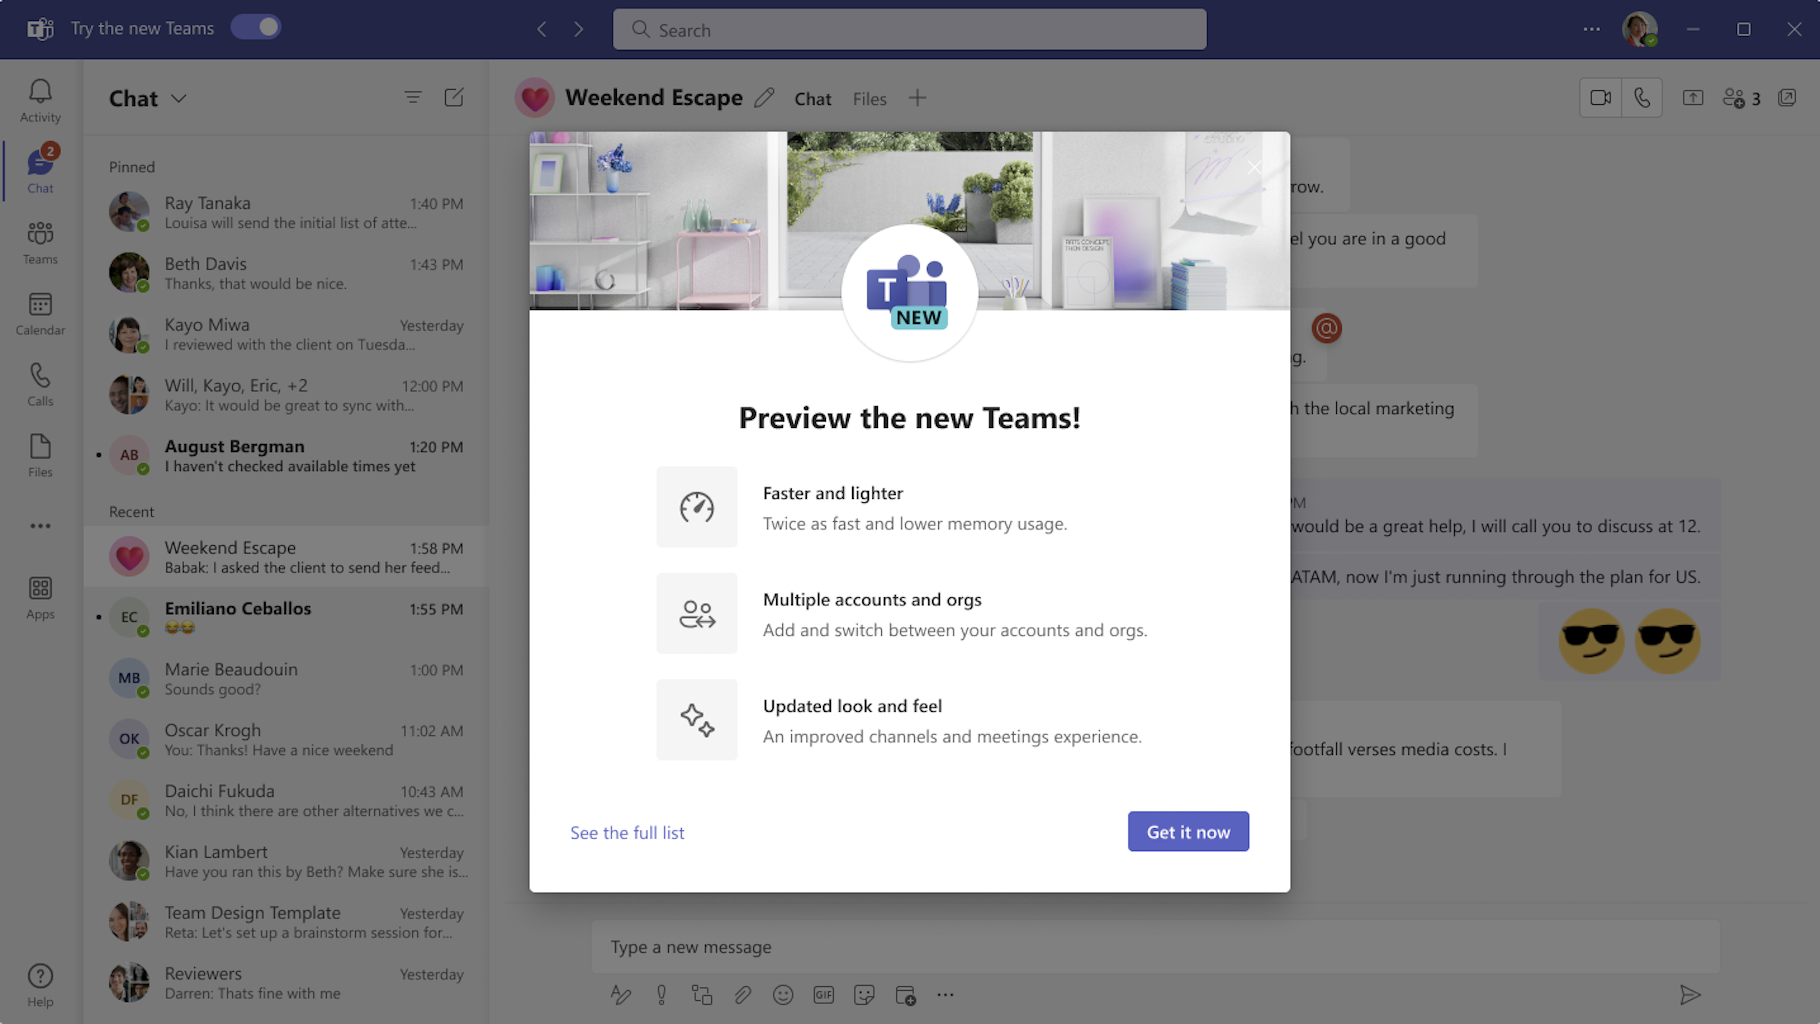 Microsoft Teams Is Getting a Big Update (and You Can Try It Now) - CNET